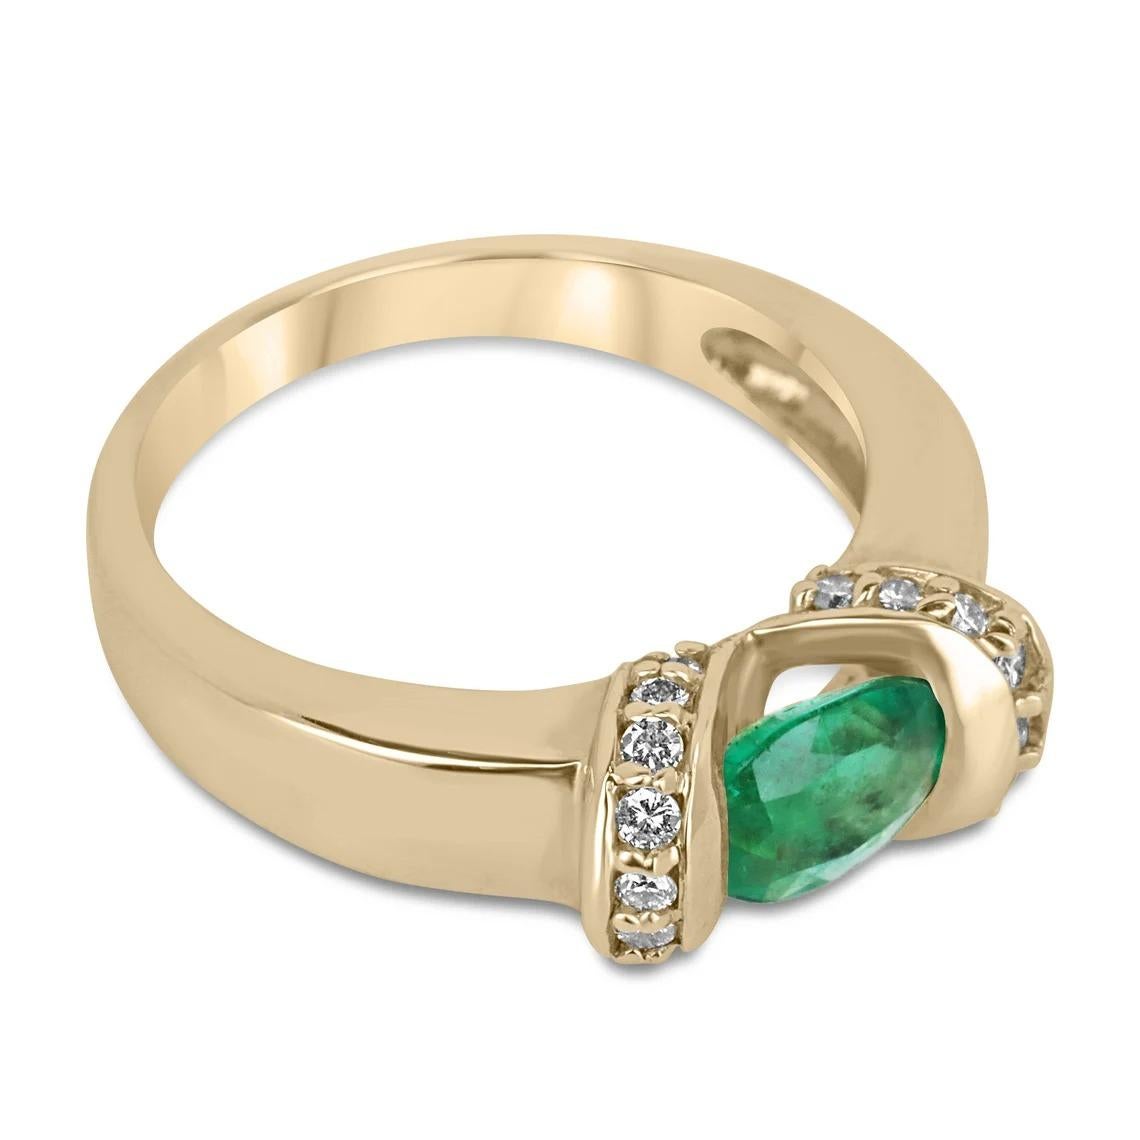 This stunning ring features a gorgeous oval cut emerald sourced from the rich mines of Colombia, weighing 1.0 carat with exceptional clarity and luster, and displaying a vivid, rich green hue. The emerald is set in an east to west direction in a